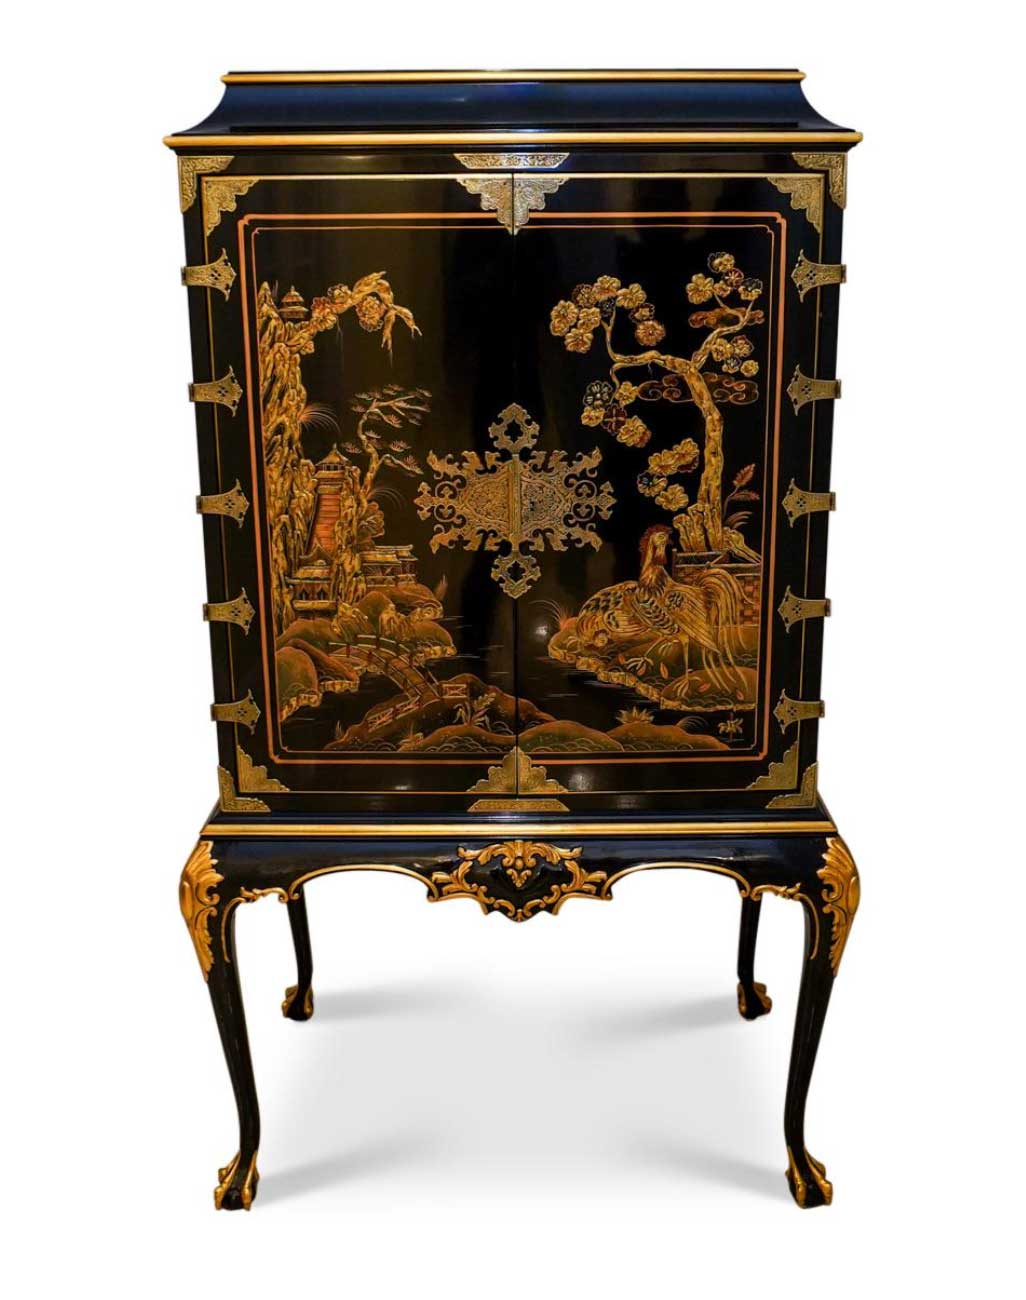 “Karges” Queen Anne style lacquered cabinet